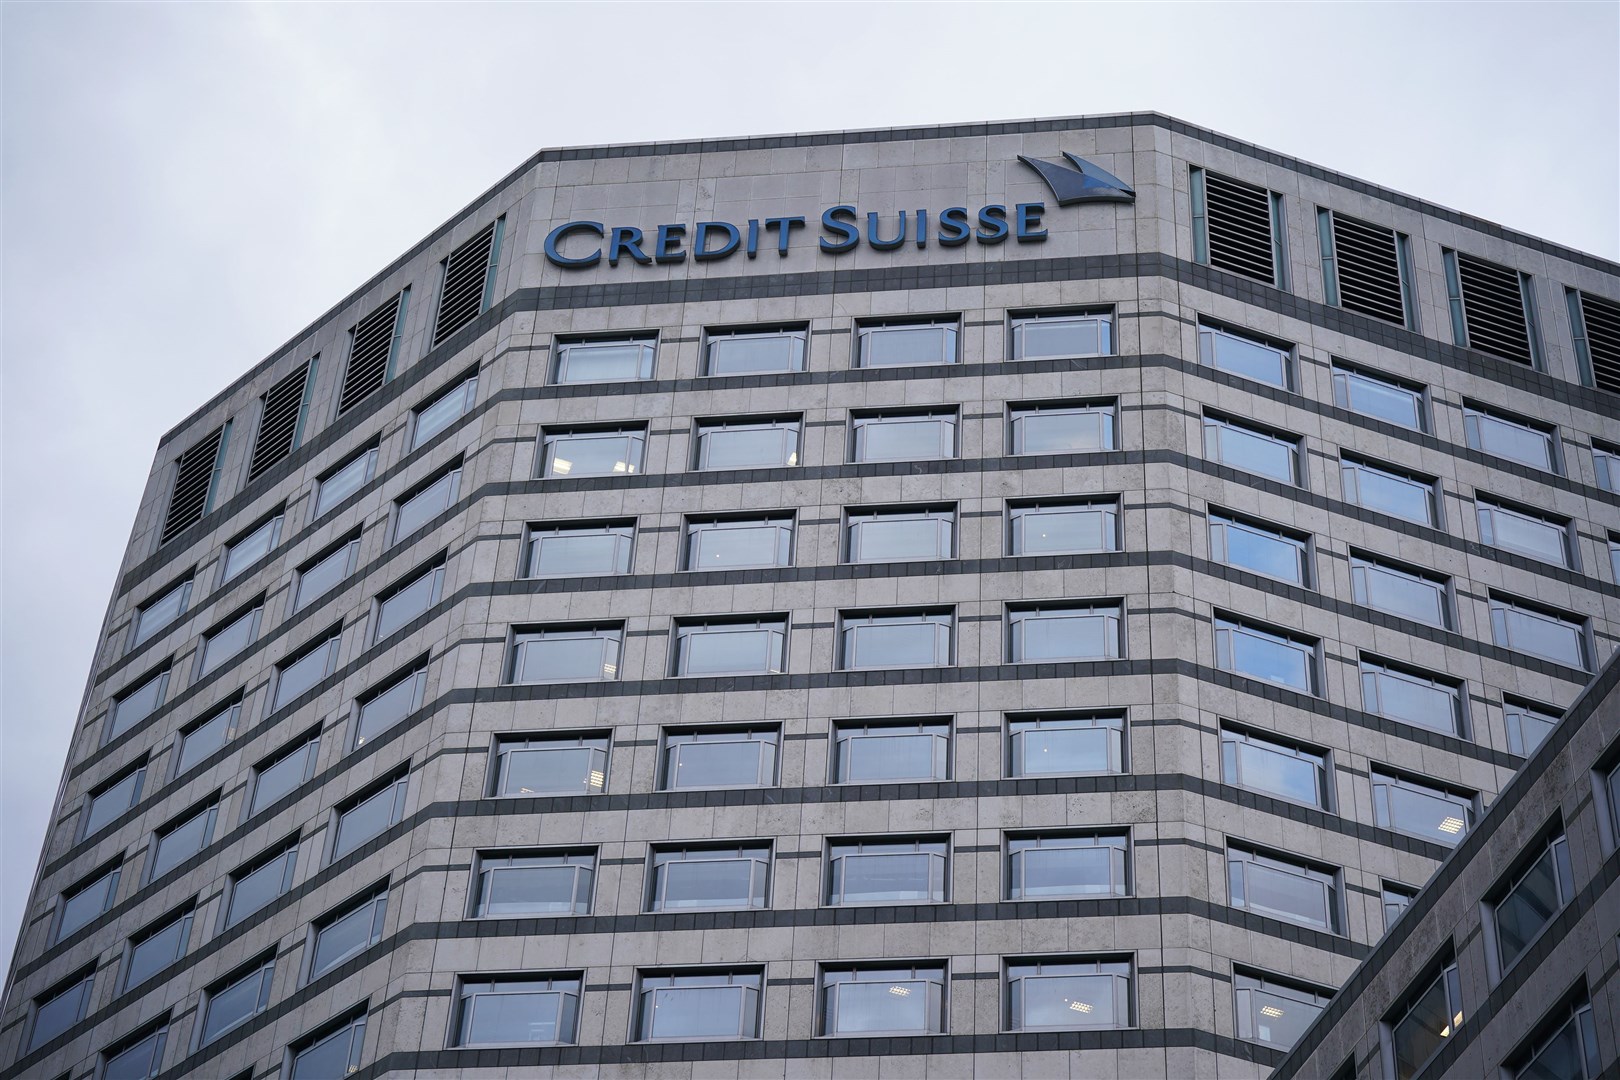 UBS bought Credit Suisse for 3.25 billion US dollars (£2.64 billion) in a historic rescue deal aimed at stemming turmoil in the global financial system (PA)